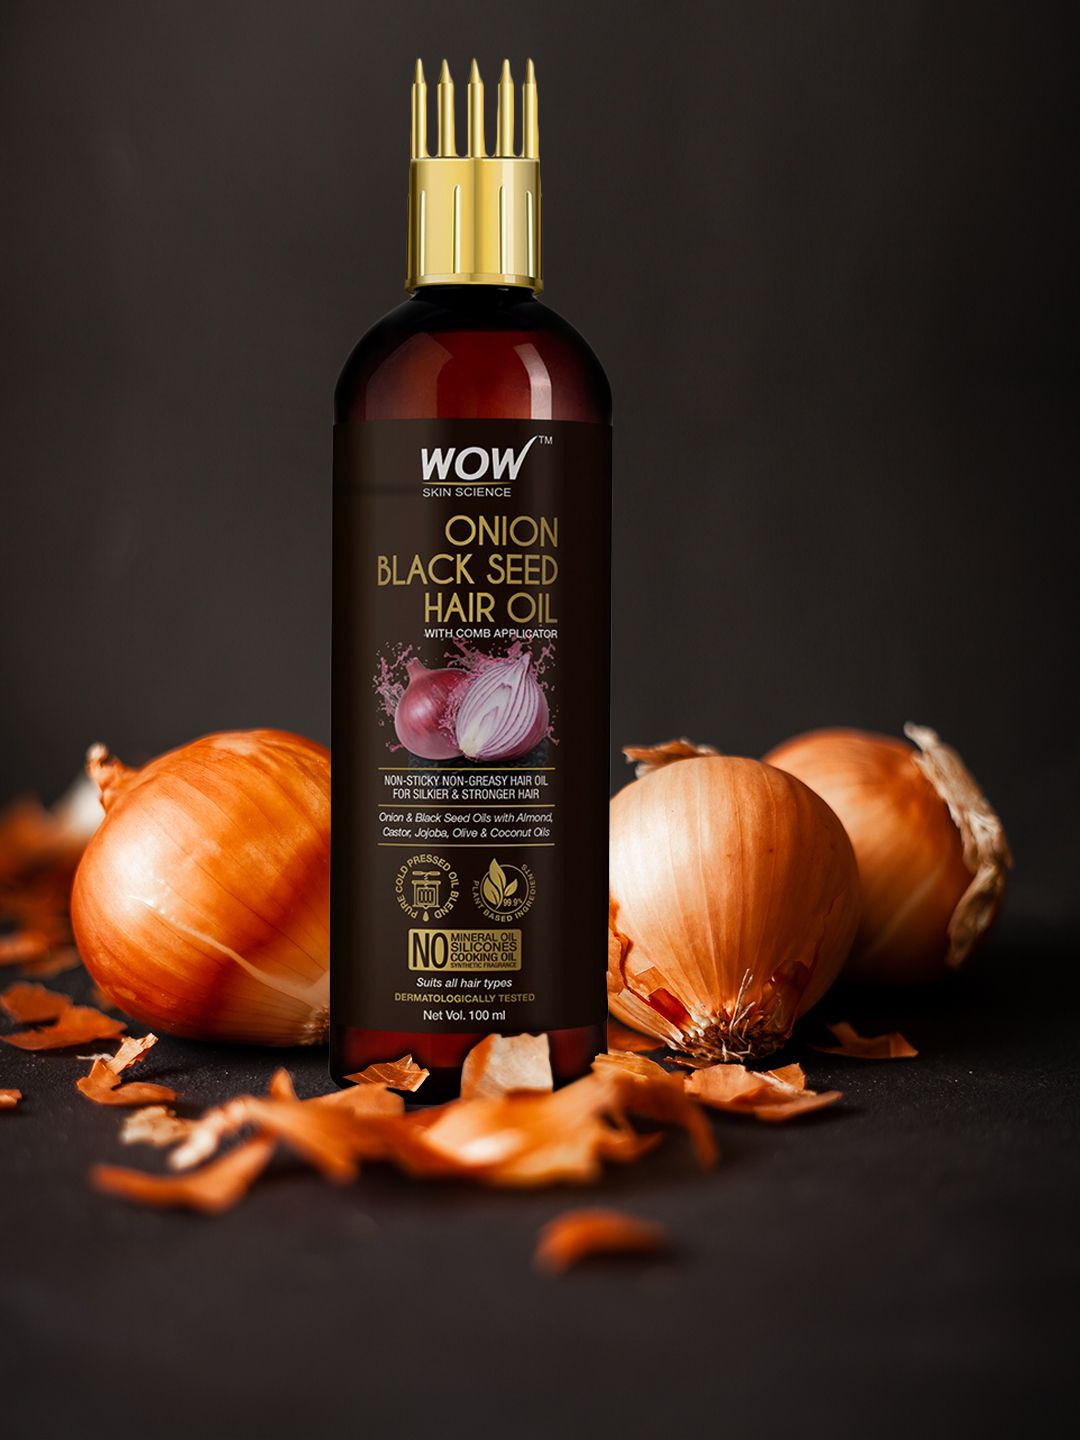 WOW SKIN SCIENCE Onion Black Seed Hair Oil - With Comb Applicator - 100 ml Price in India